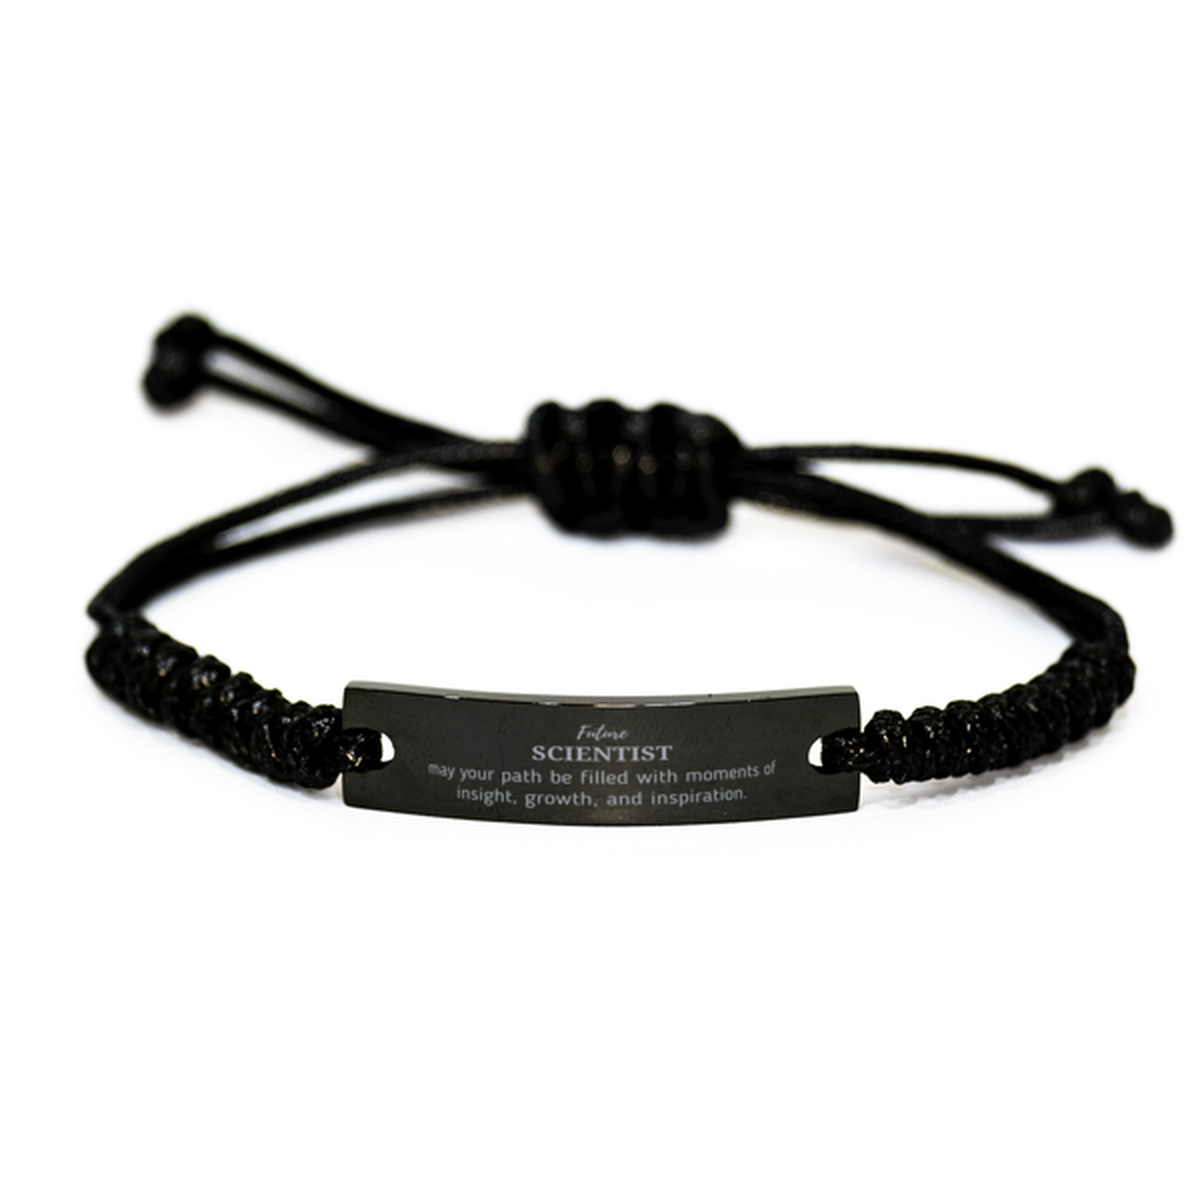 Future Scientist Gifts, May your path be filled with moments of insight, Graduation Gifts for New Scientist, Christmas Unique Black Rope Bracelet For Men, Women, Friends